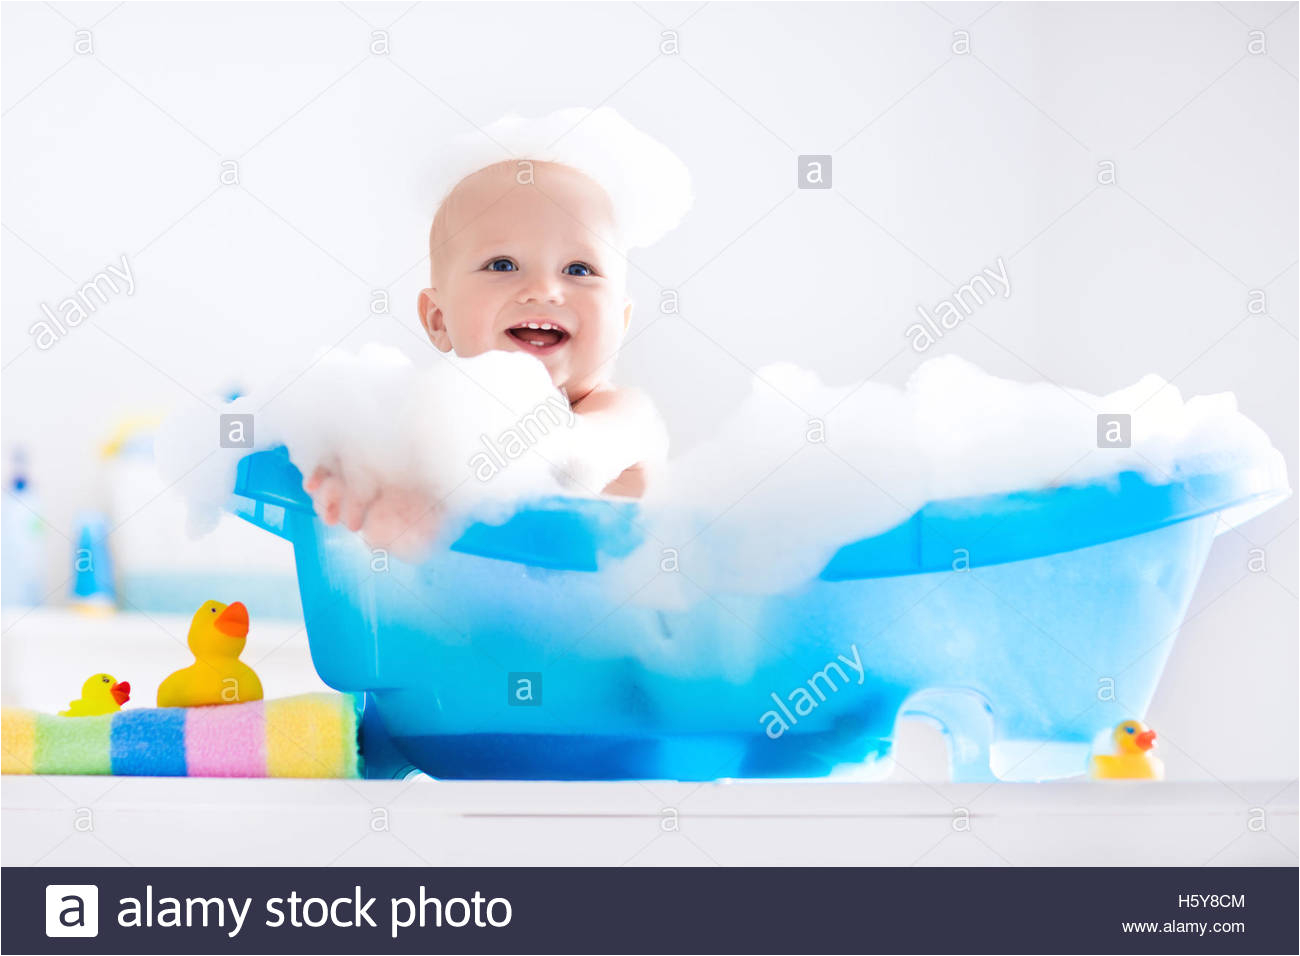 stock photo happy laughing baby taking a bath playing with foam bubbles little